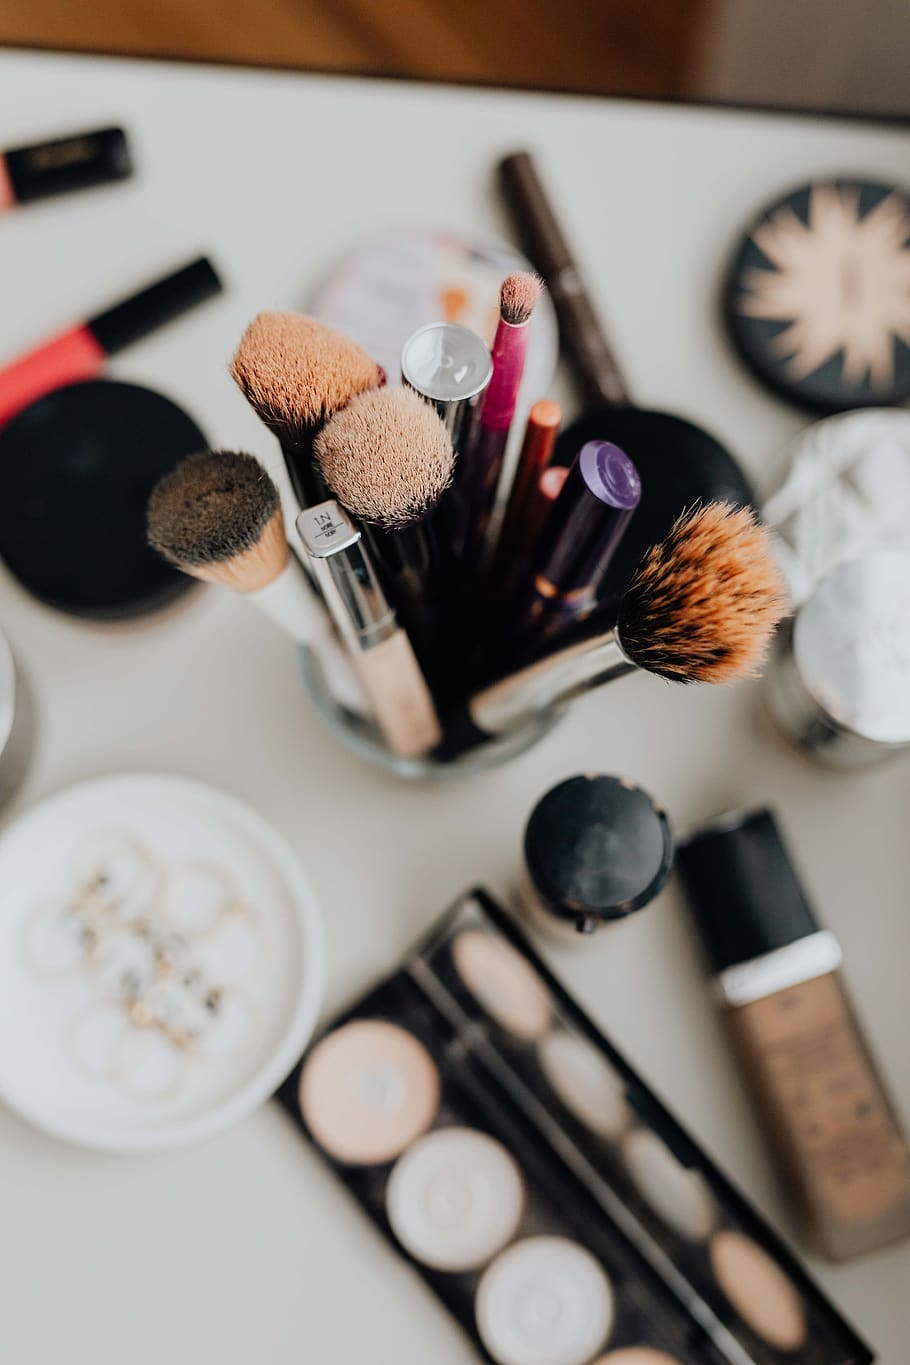 essentials, cosmetics, beauty, foundation, glamour, Makeup, brushes, make-up, make-up brush, beauty product